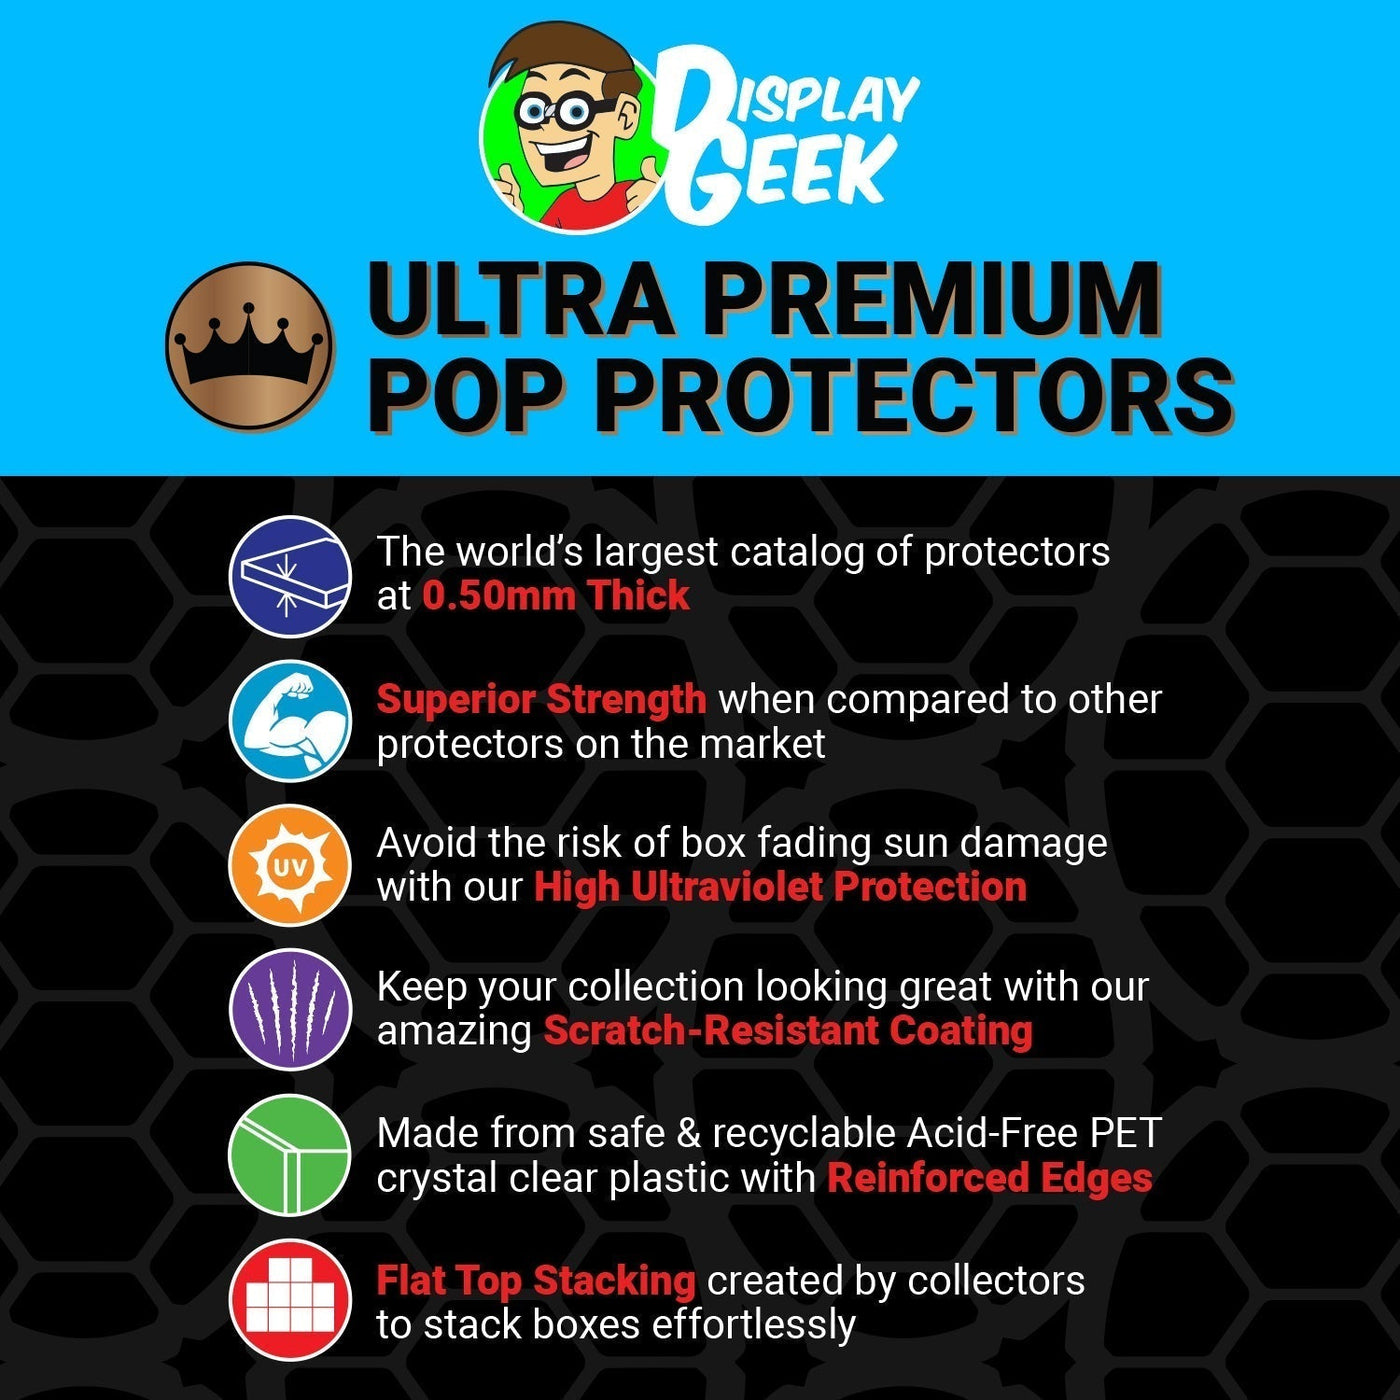 Pop Protector for 6 inch Godzilla Atomic Breath Glow #239 Super Funko Pop on The Protector Guide App by Display Geek